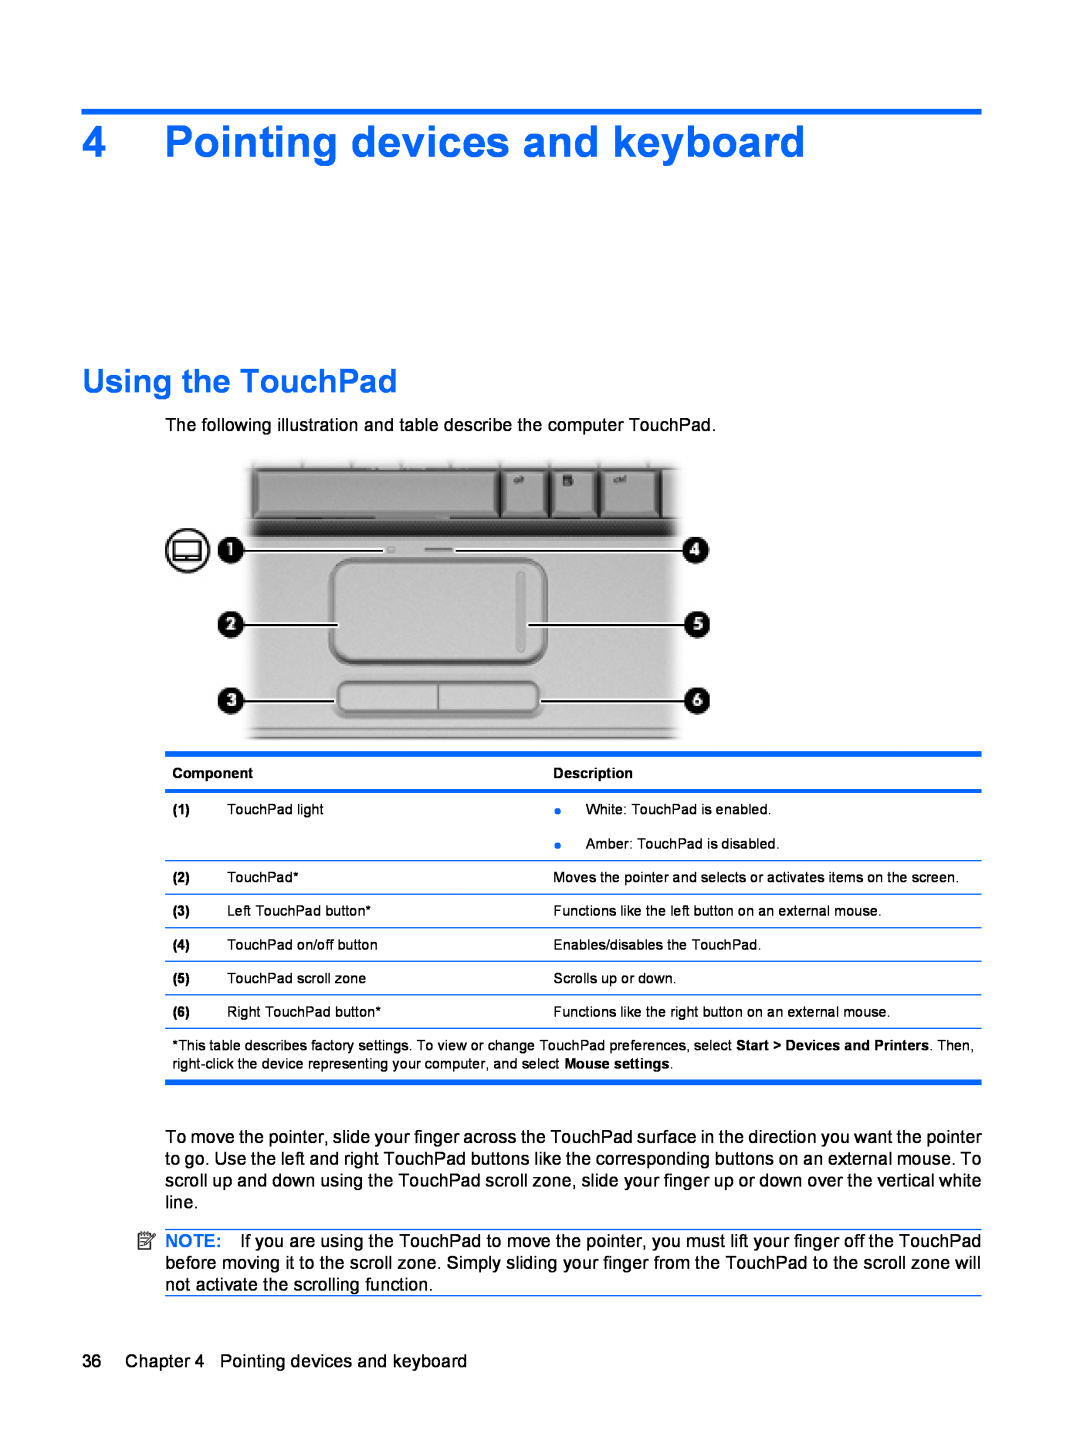 HP dv4-2160us manual Pointing devices and keyboard, Using the TouchPad 